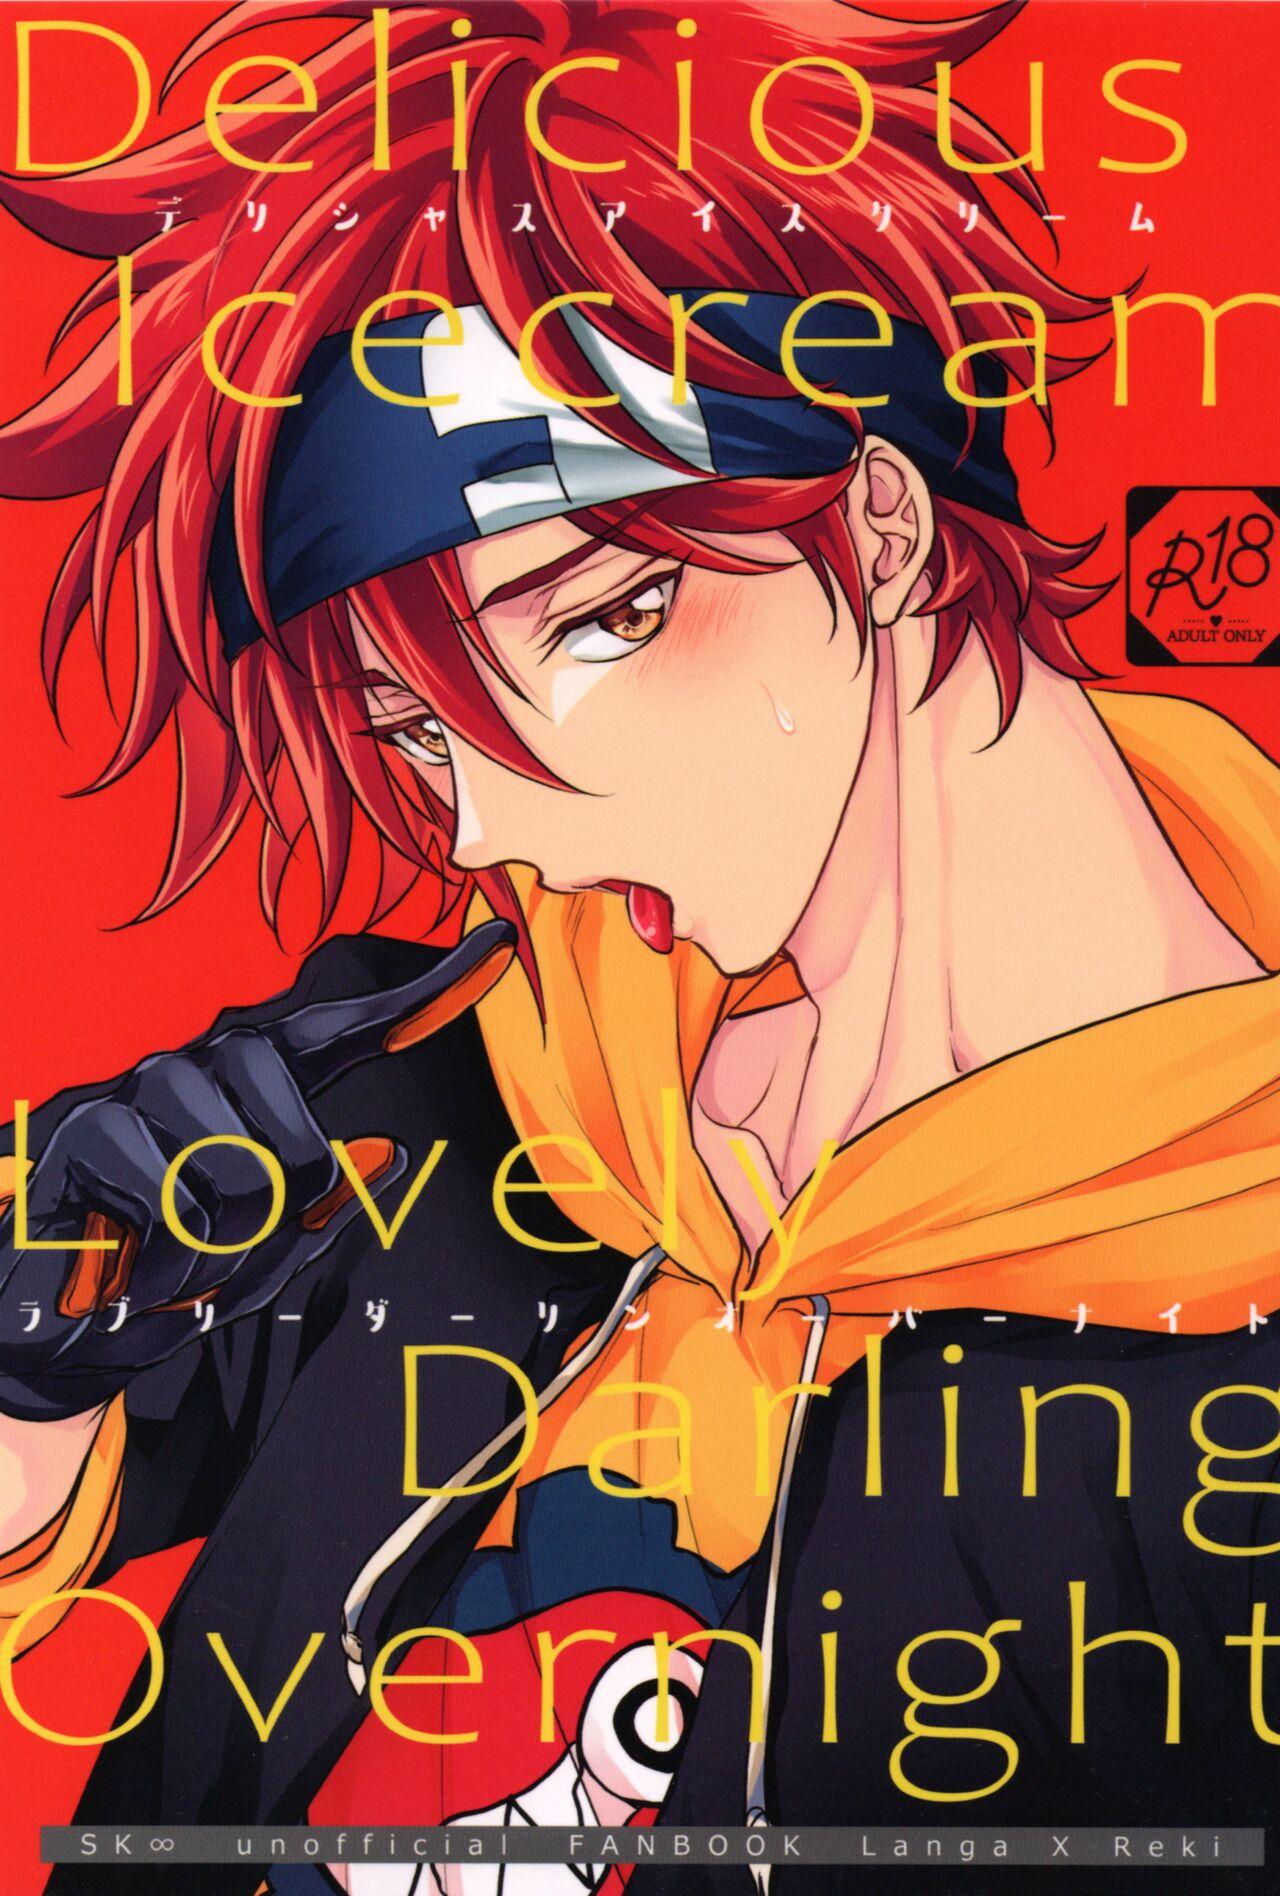 Delicious Icecream Lovely Darling Overnight (OPEN THE GATE! 7) [Di (ウソヂ)] (SK8 エスケーエイト) 0